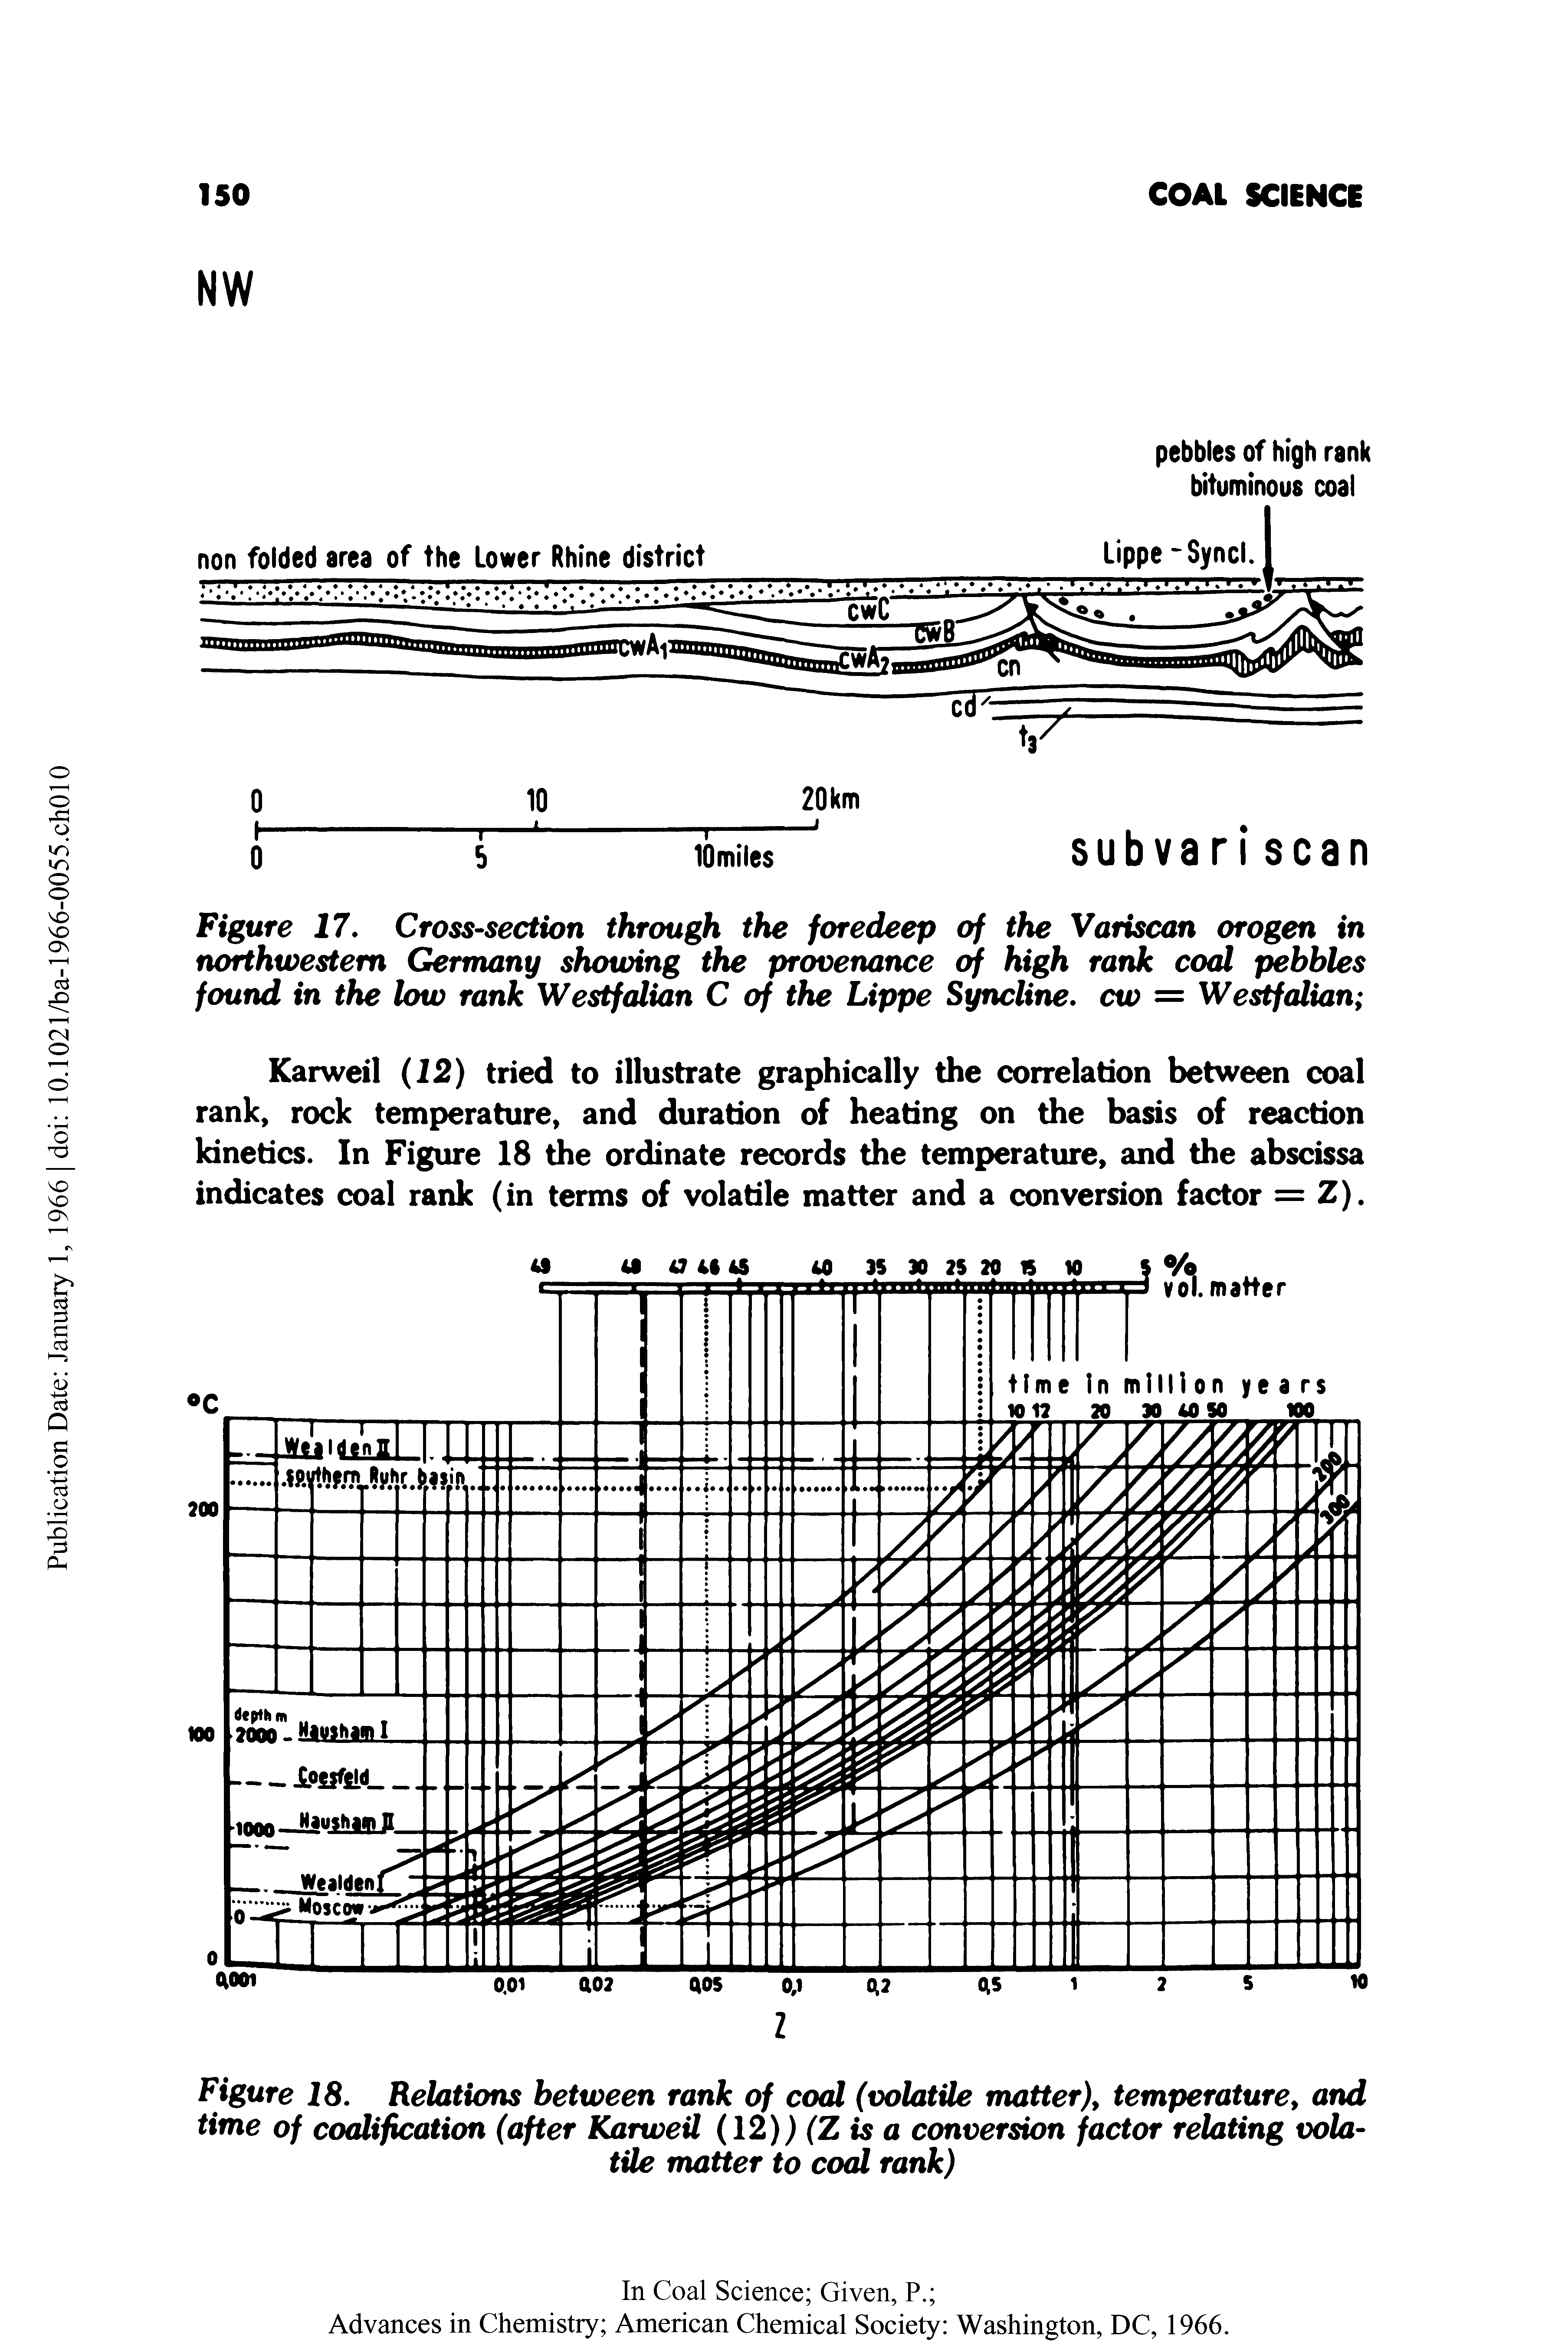 Figure 18. Relations between rank of coal (volatile matter), temperature, and time of coalification (after Karweil (12)) (Z is a conversion factor relating volatile matter to coal rank)...